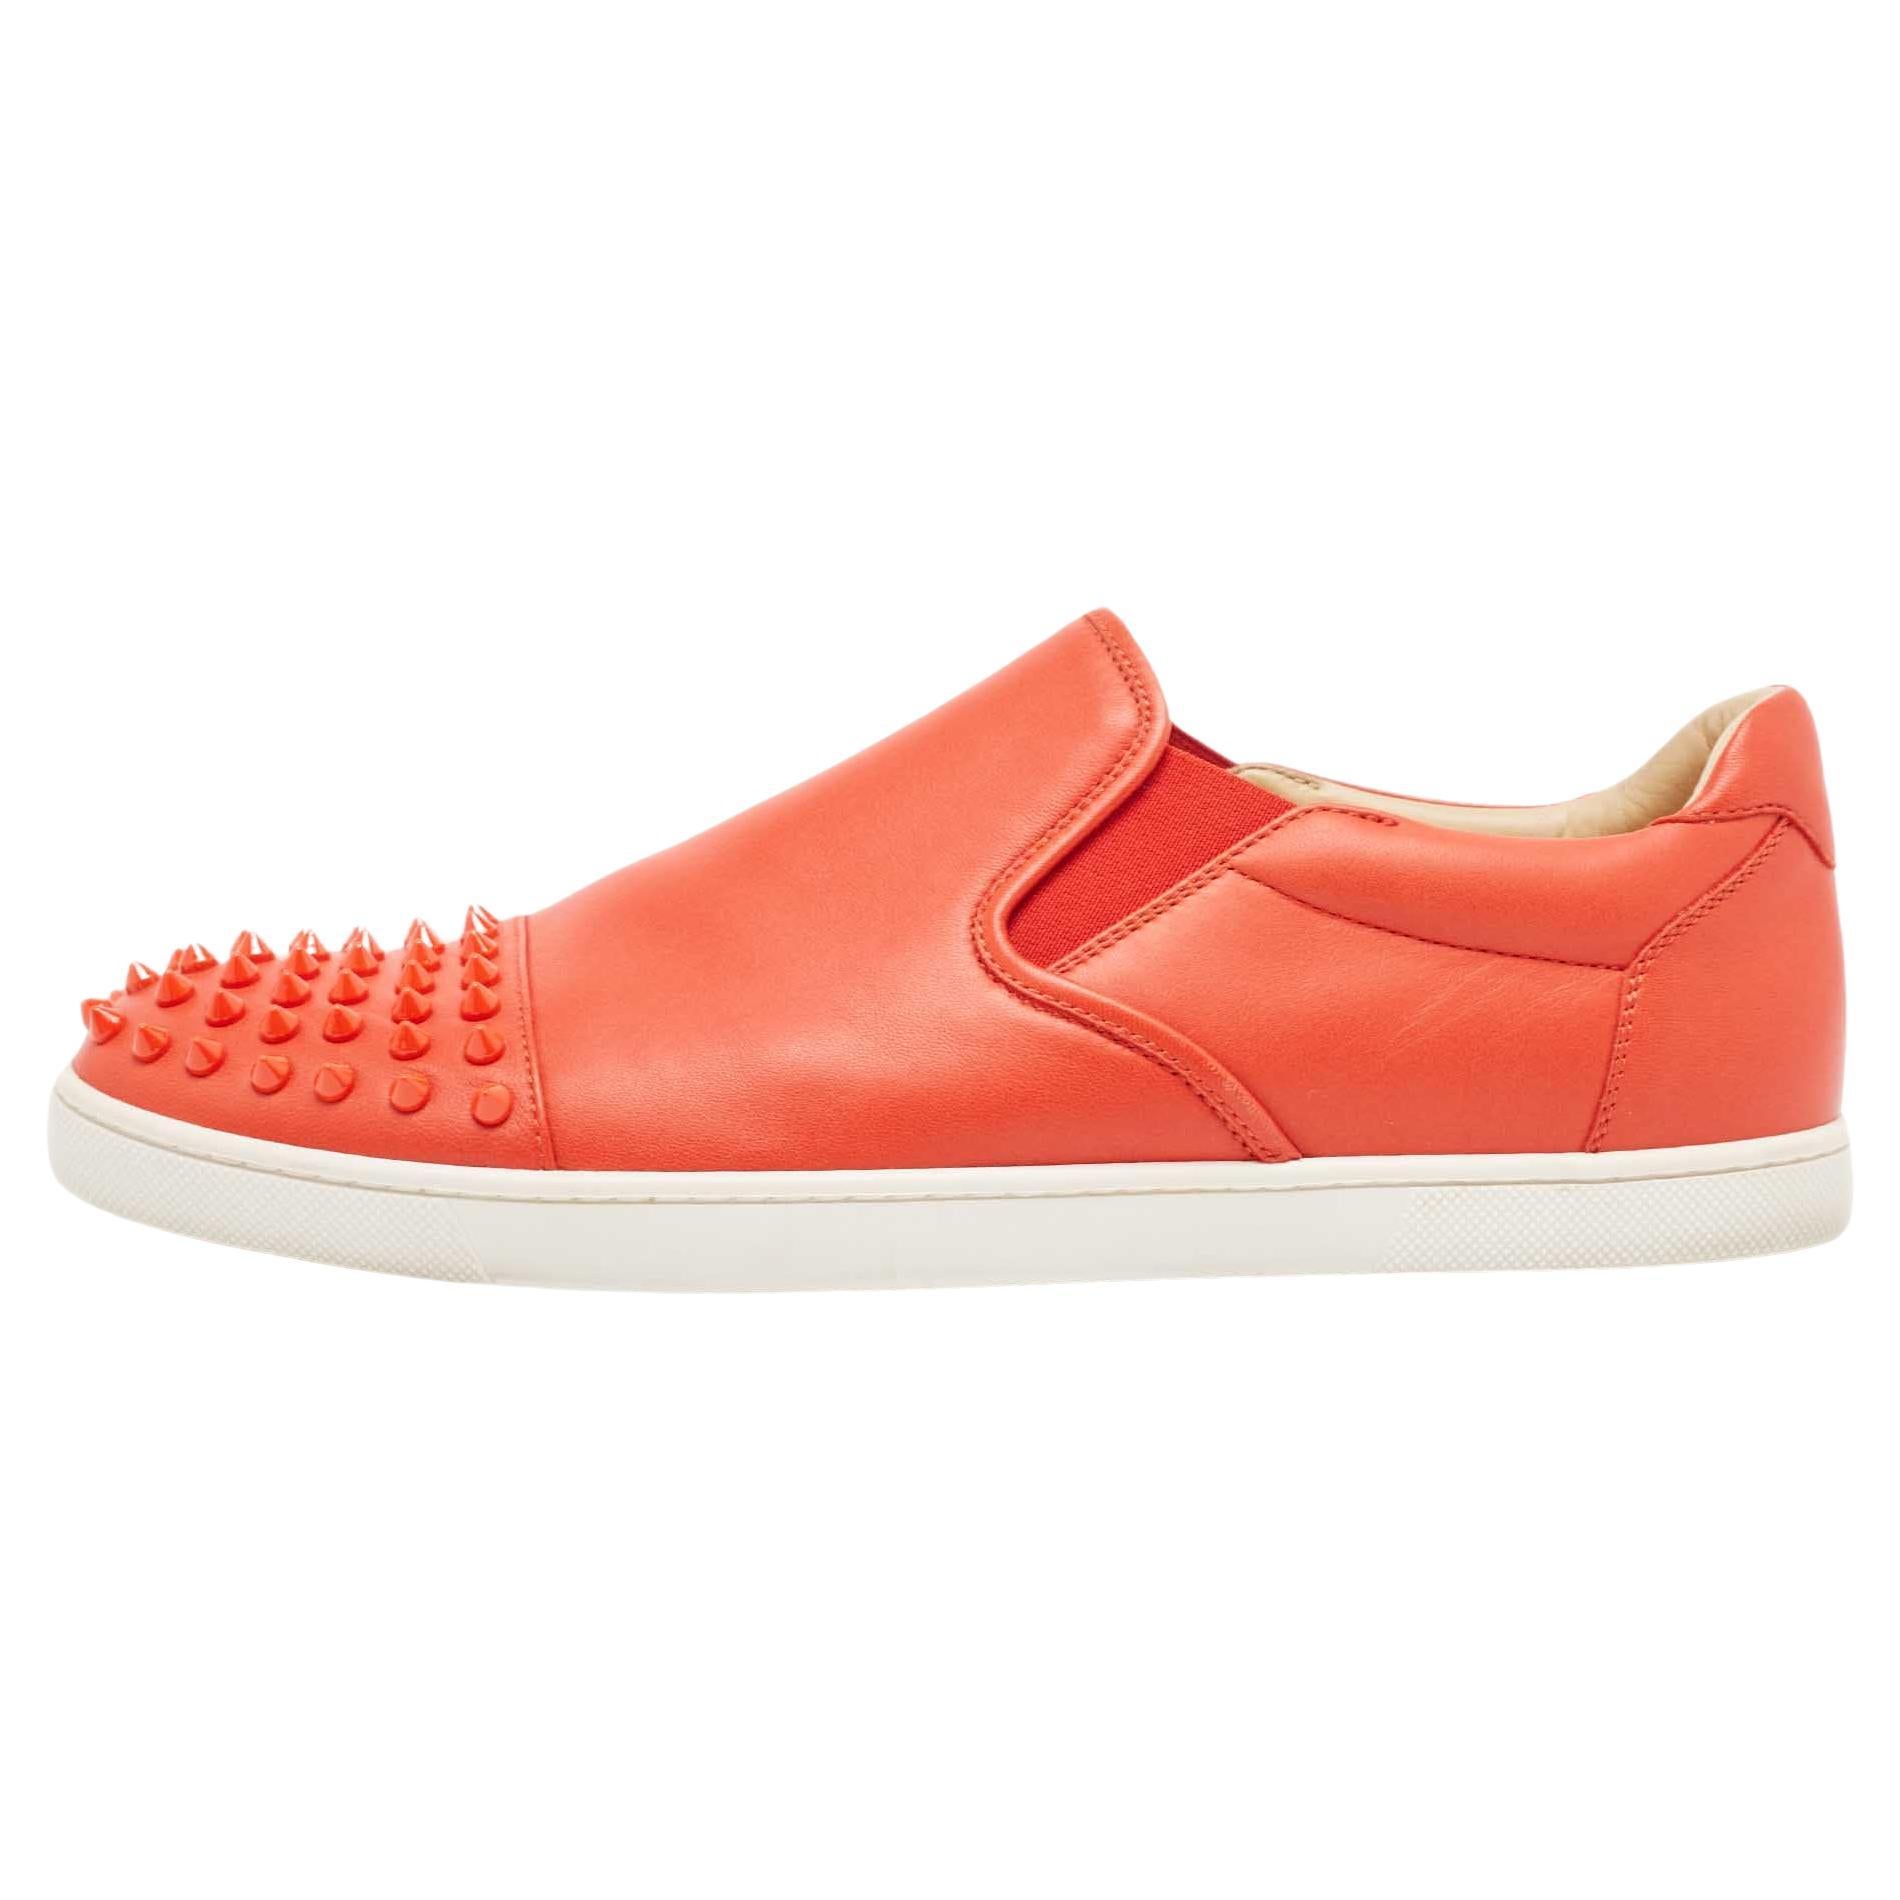 Christian Louboutin Orange Leather Spikes Cap Toe Slip On Sneakers Size 42 For Sale